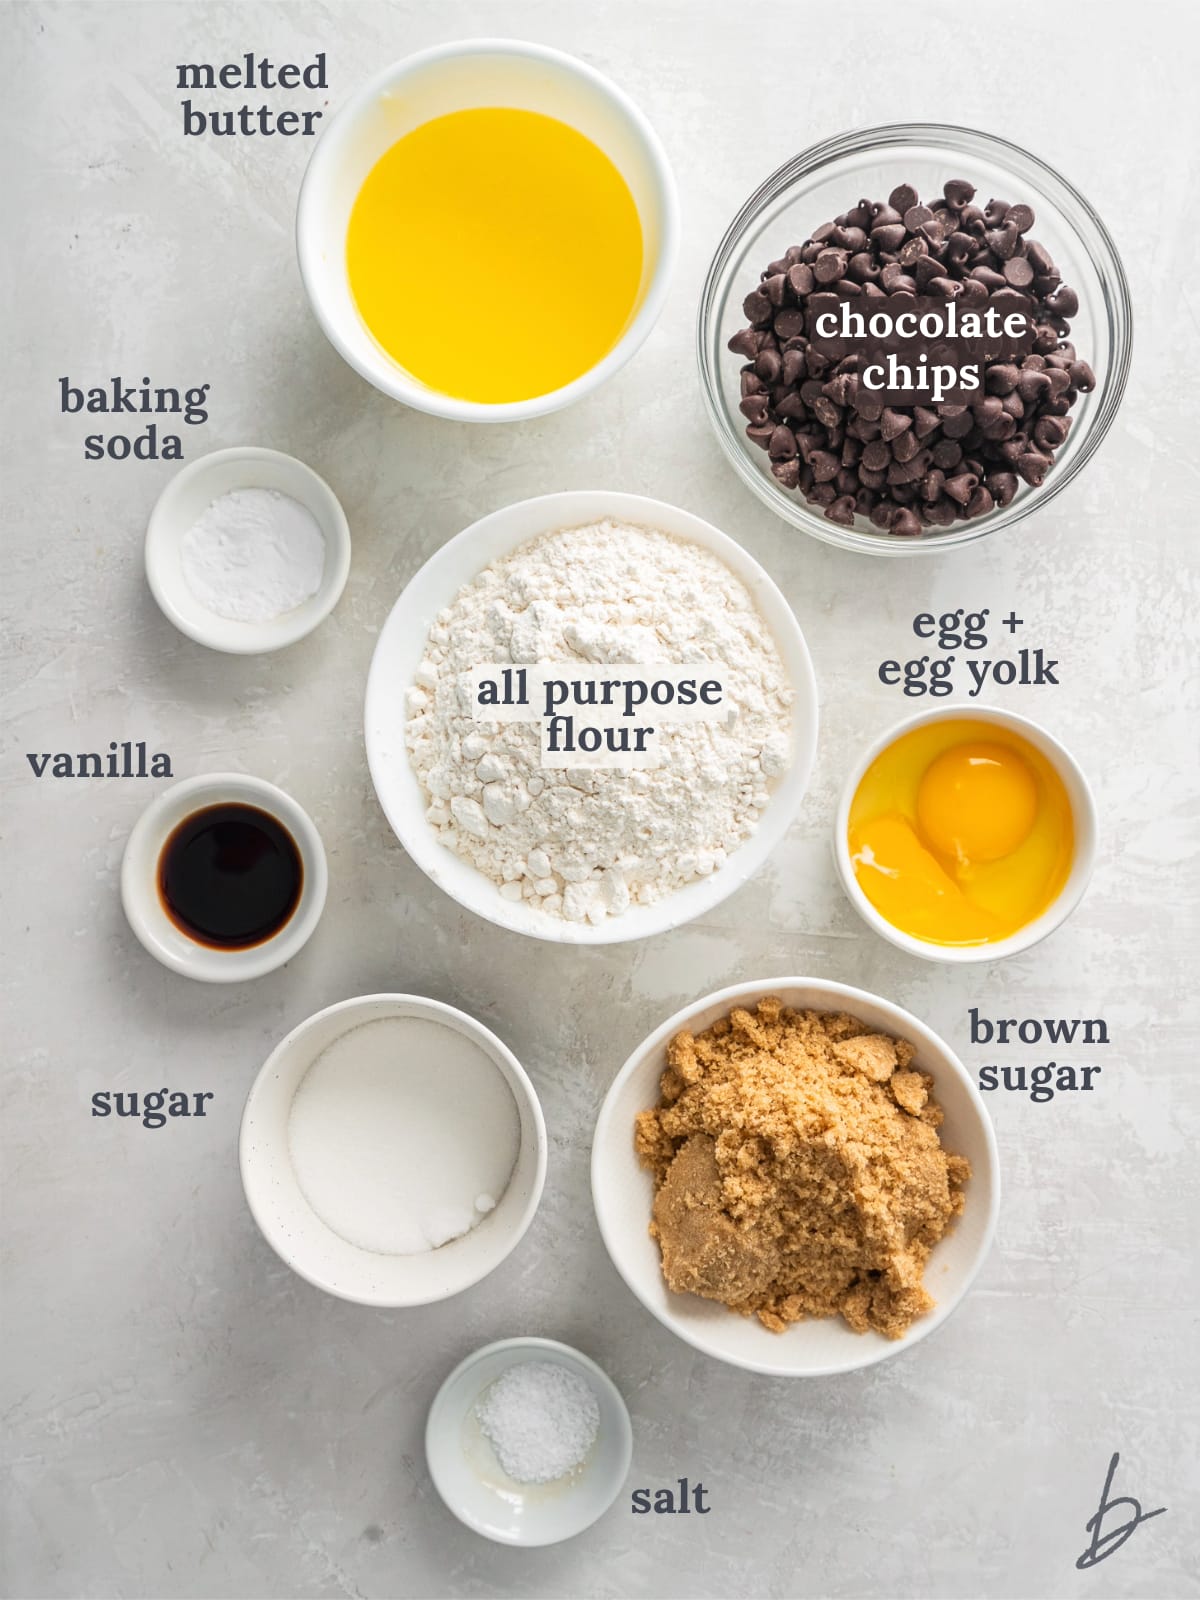 bowls of ingredients to make a skillet chocolate chip cookie.